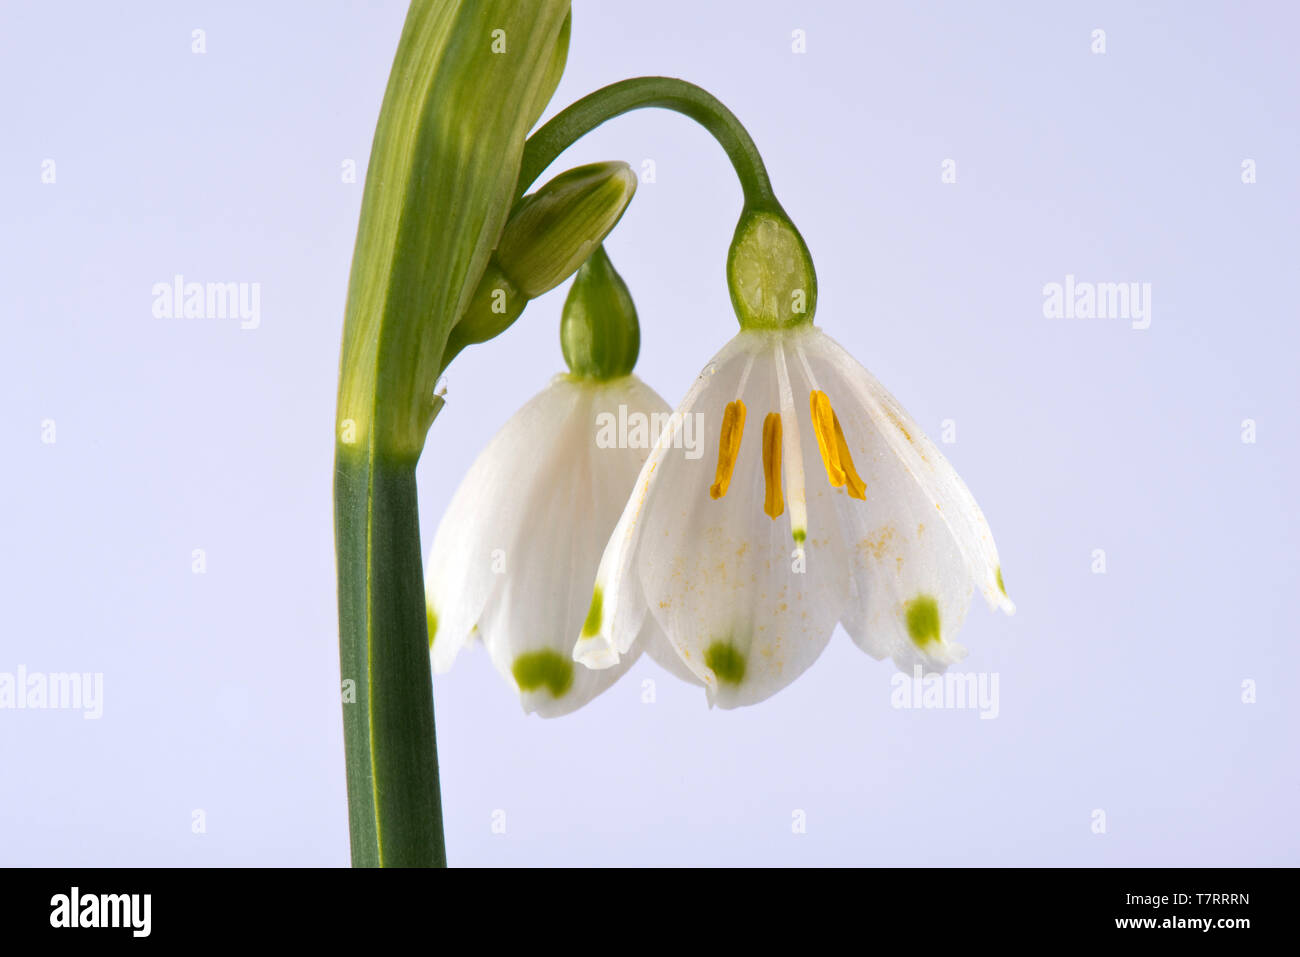 Summer snowflake or Loddon lily, Leucojum aestivum, studio image buds and flower section on spike cluster, Berkshire, April Stock Photo